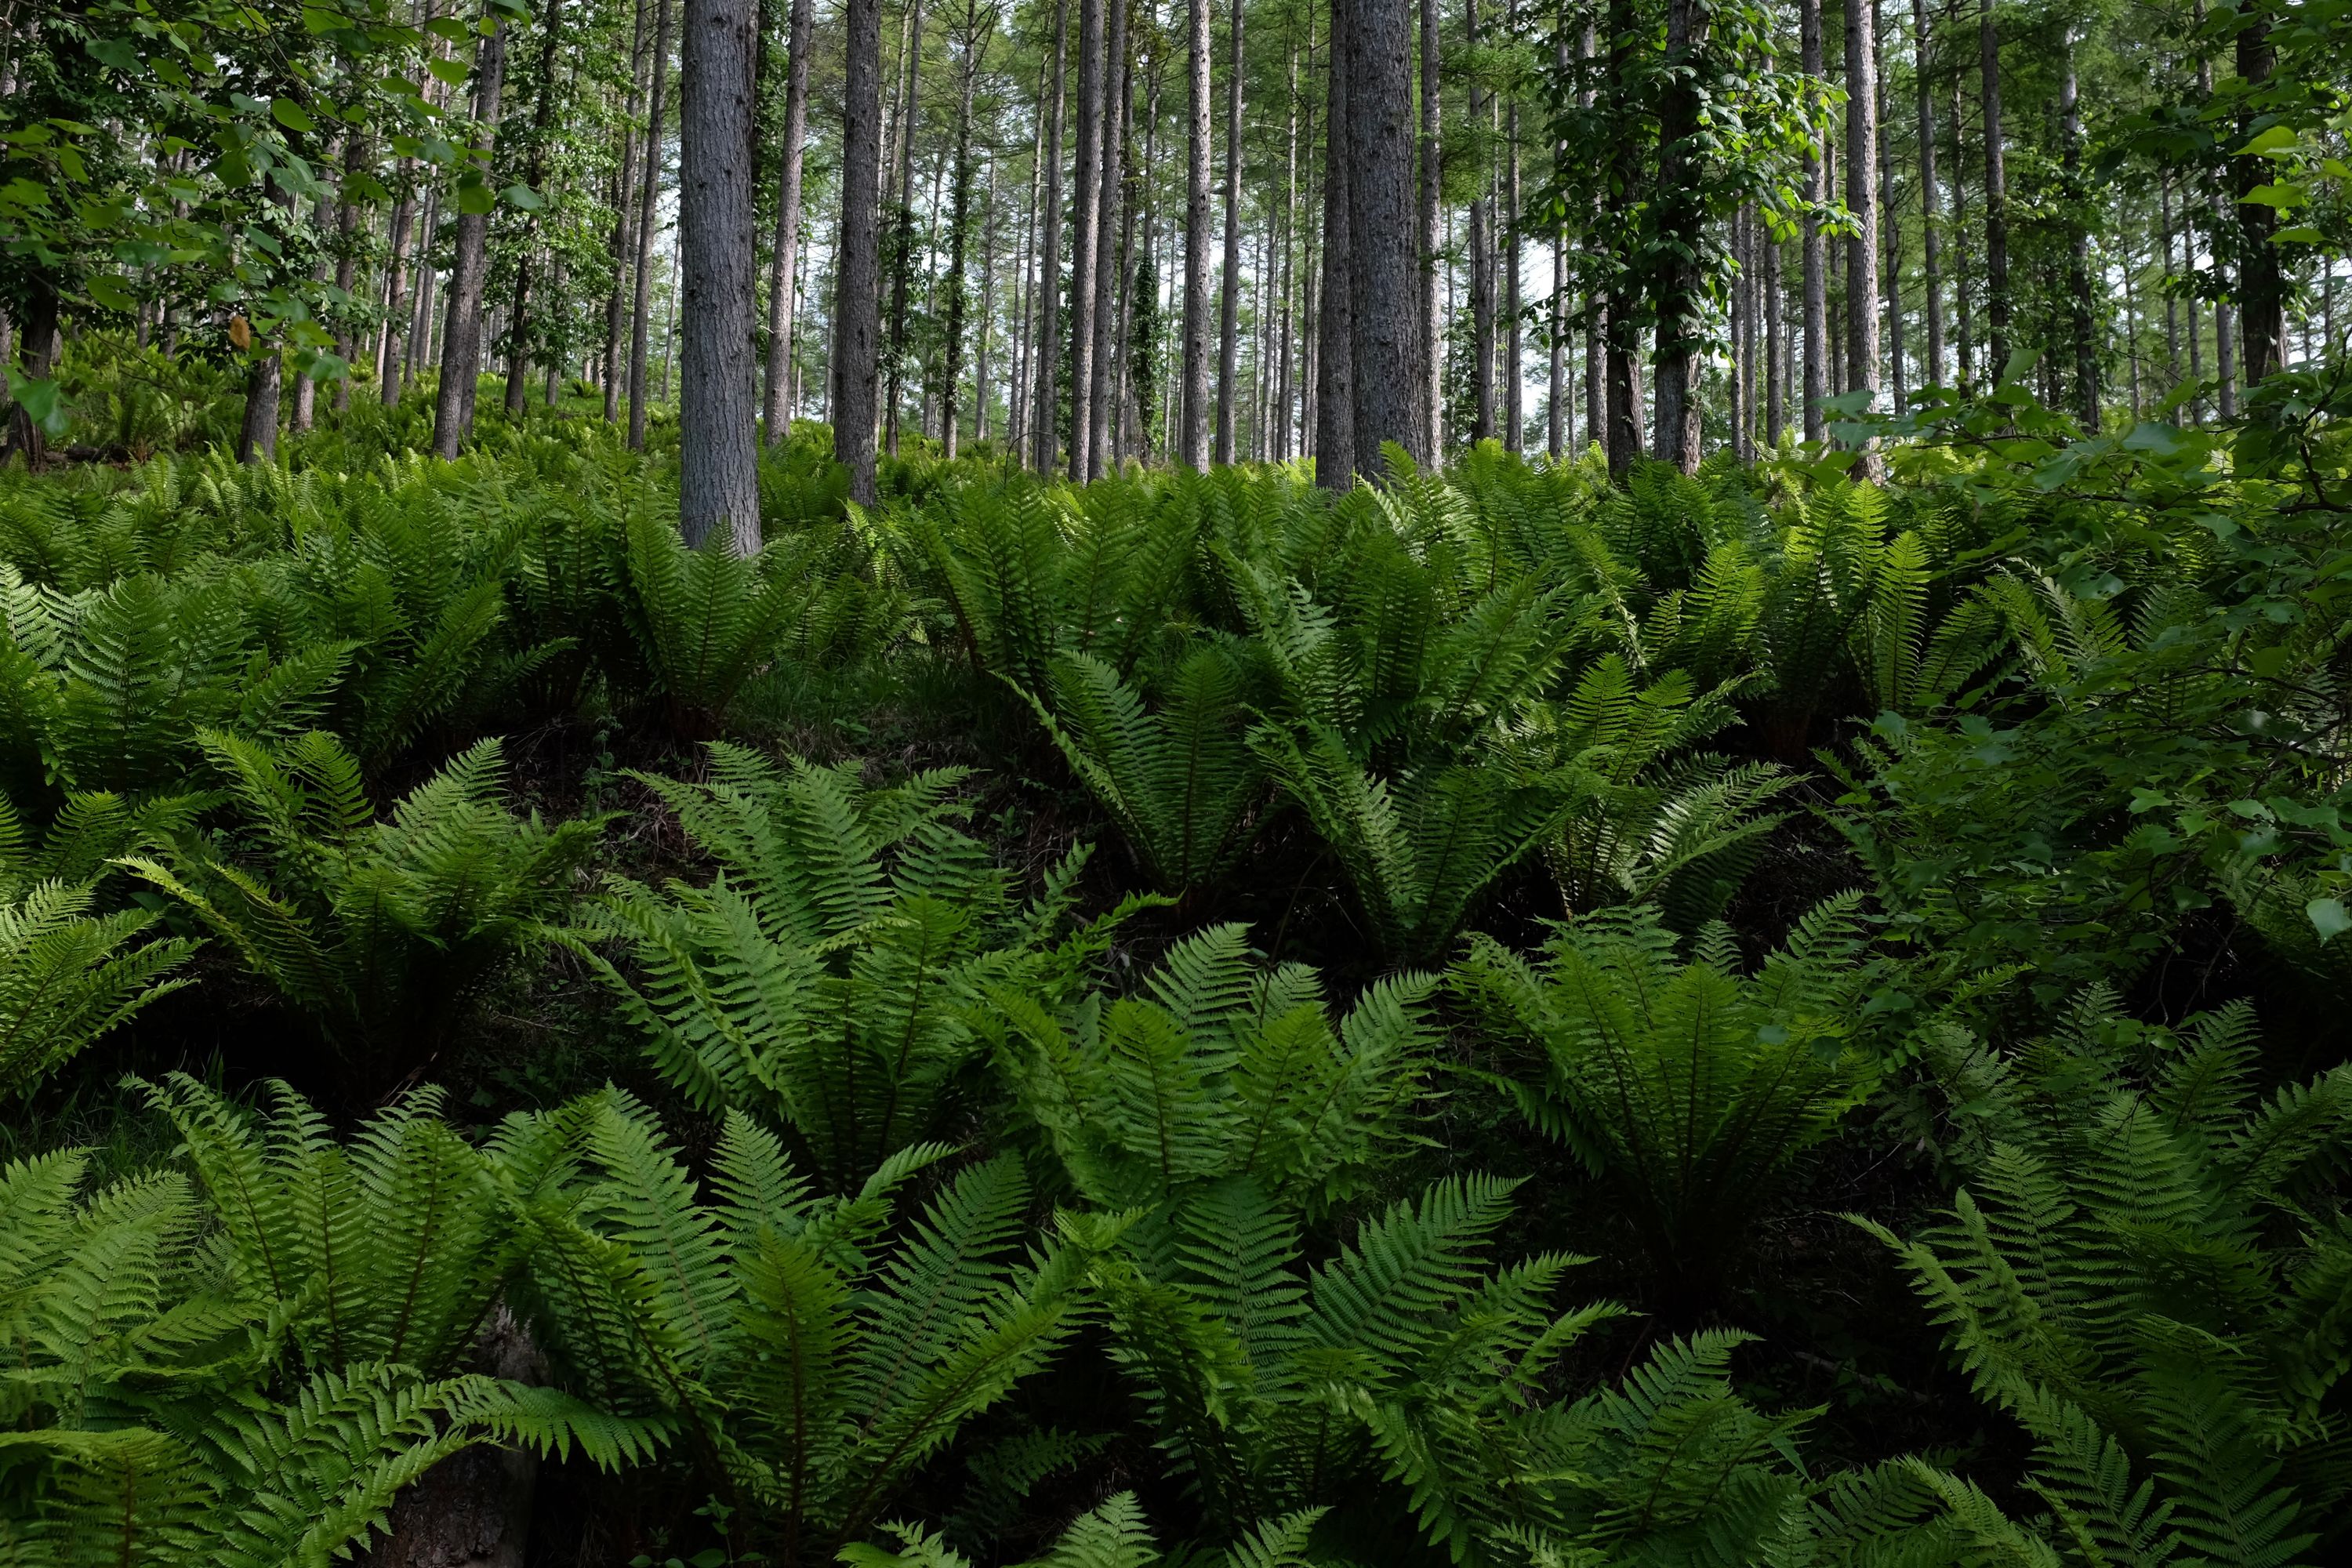 A thick undergrowth of bracken in a pine forest.